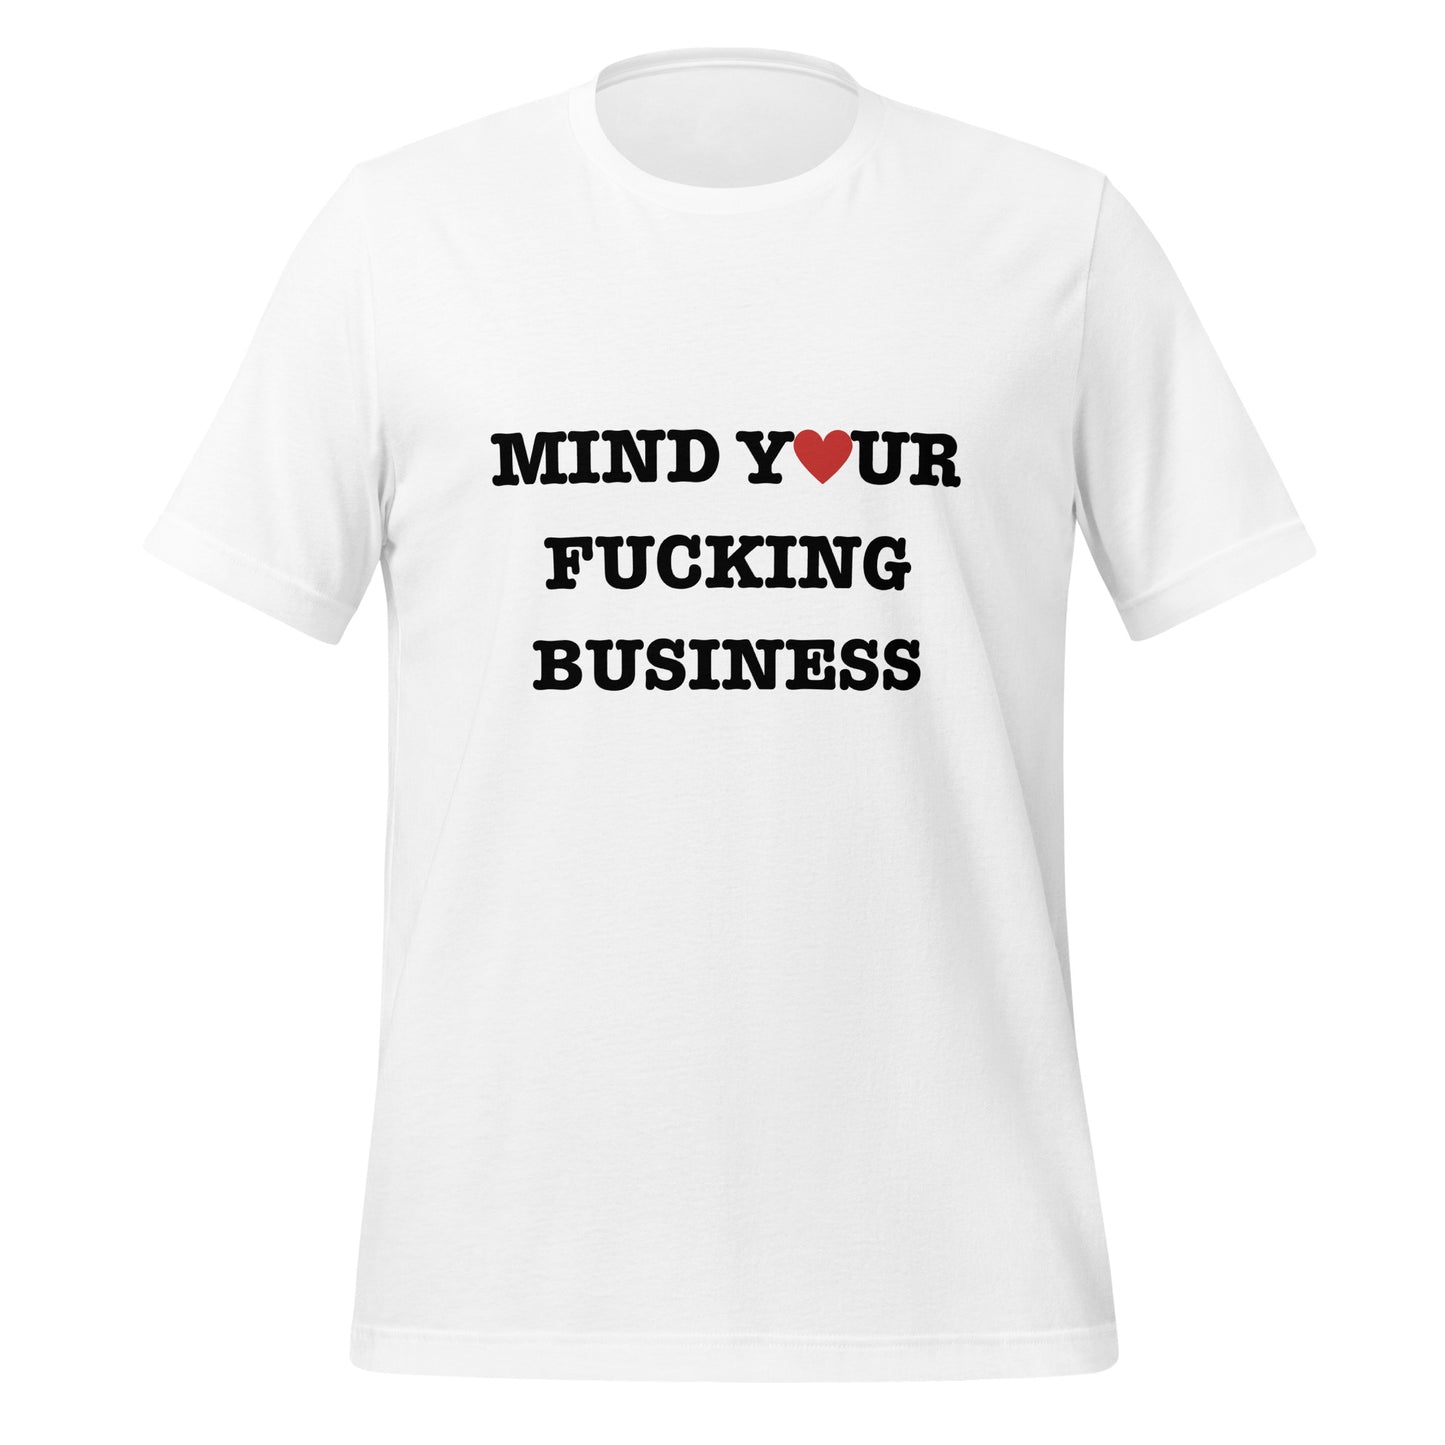 "Mind Your Business" t-shirt